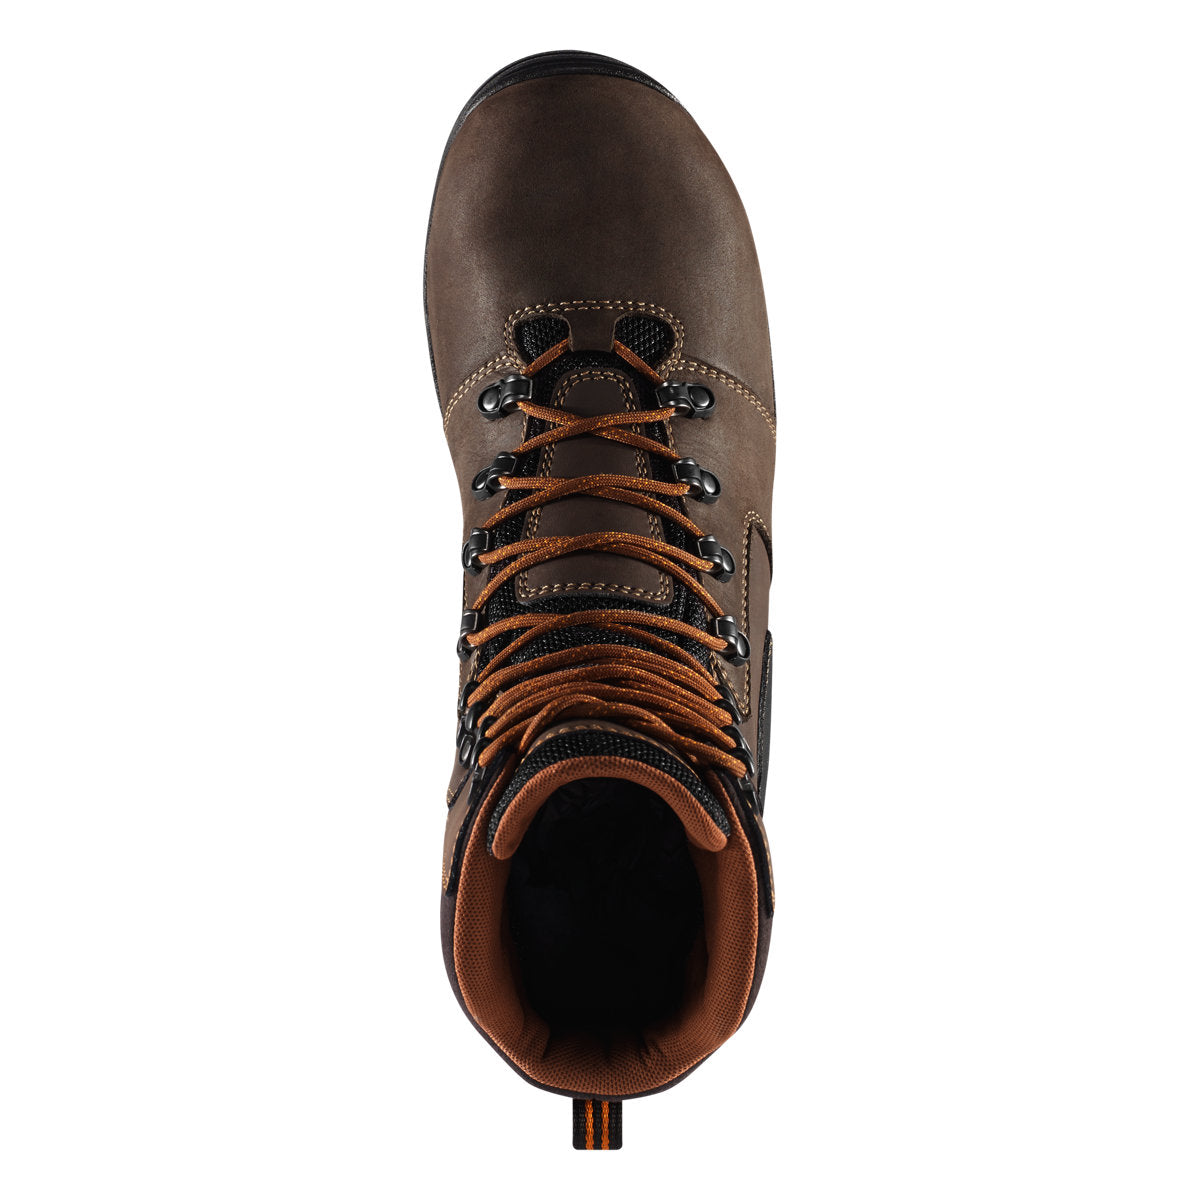 Danner Vicious 8" Safety